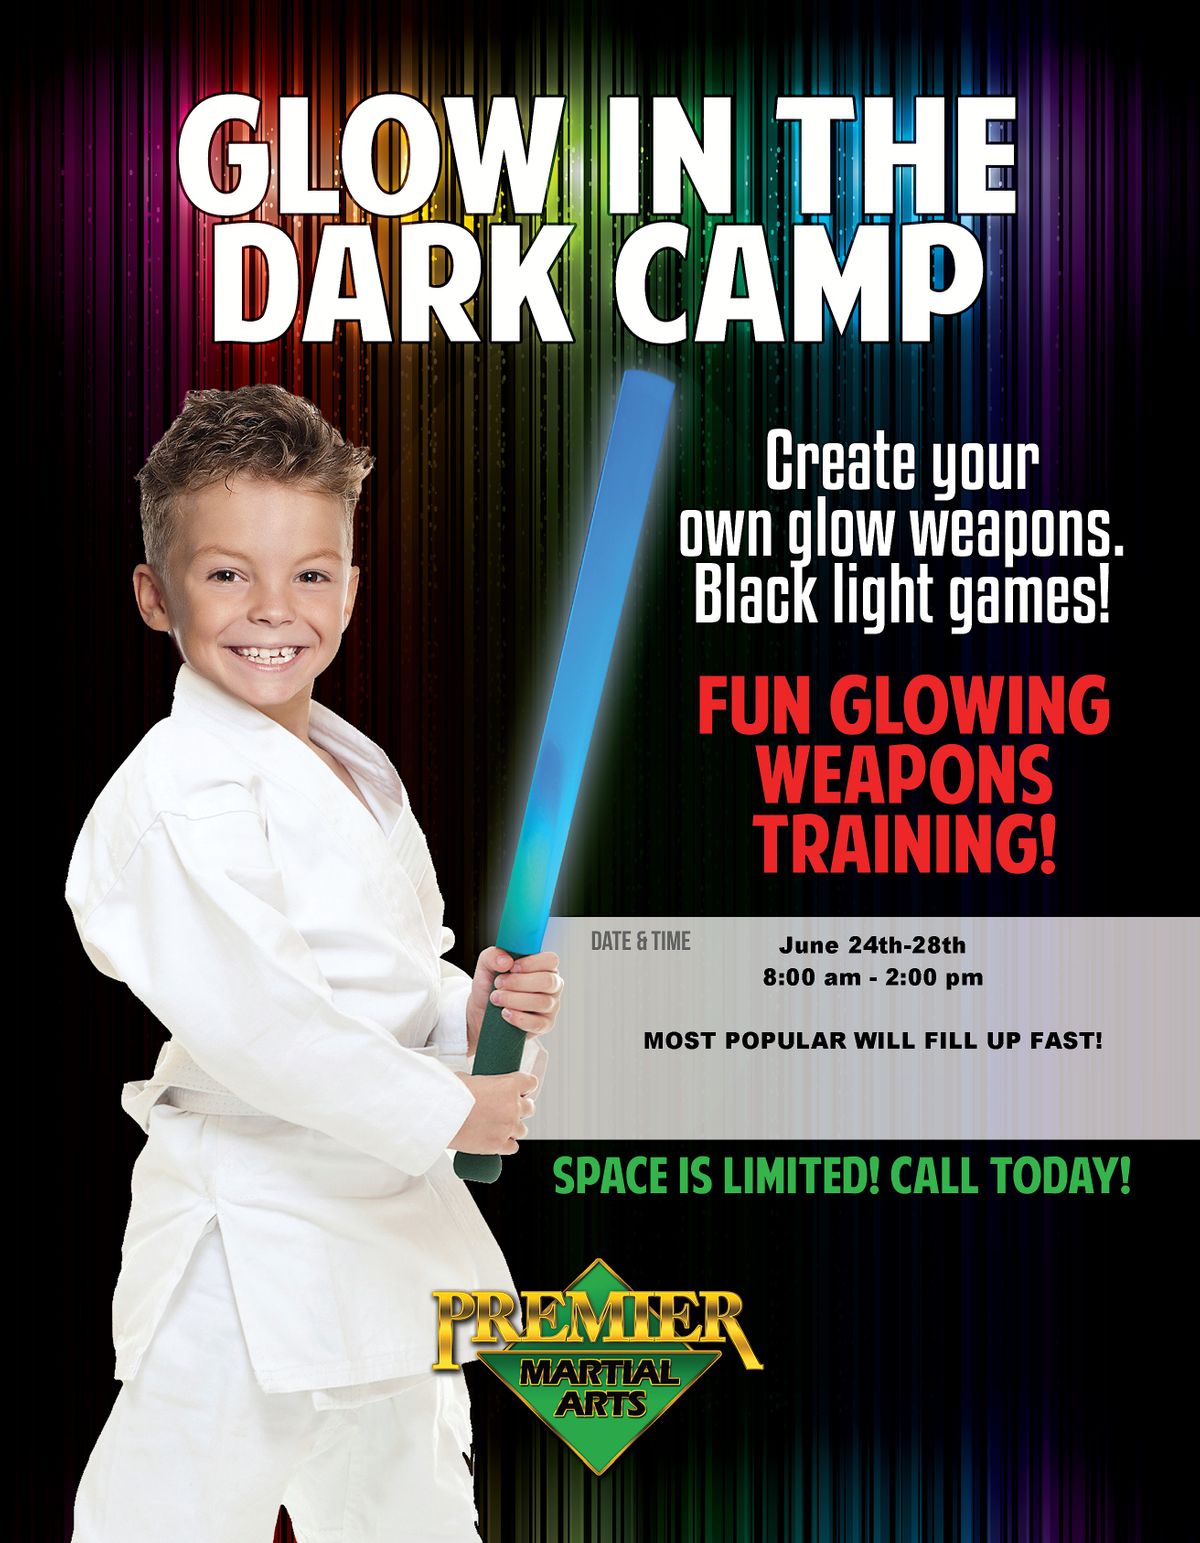 Glow in the Dark Weapons Camp @ Premier Martial Arts